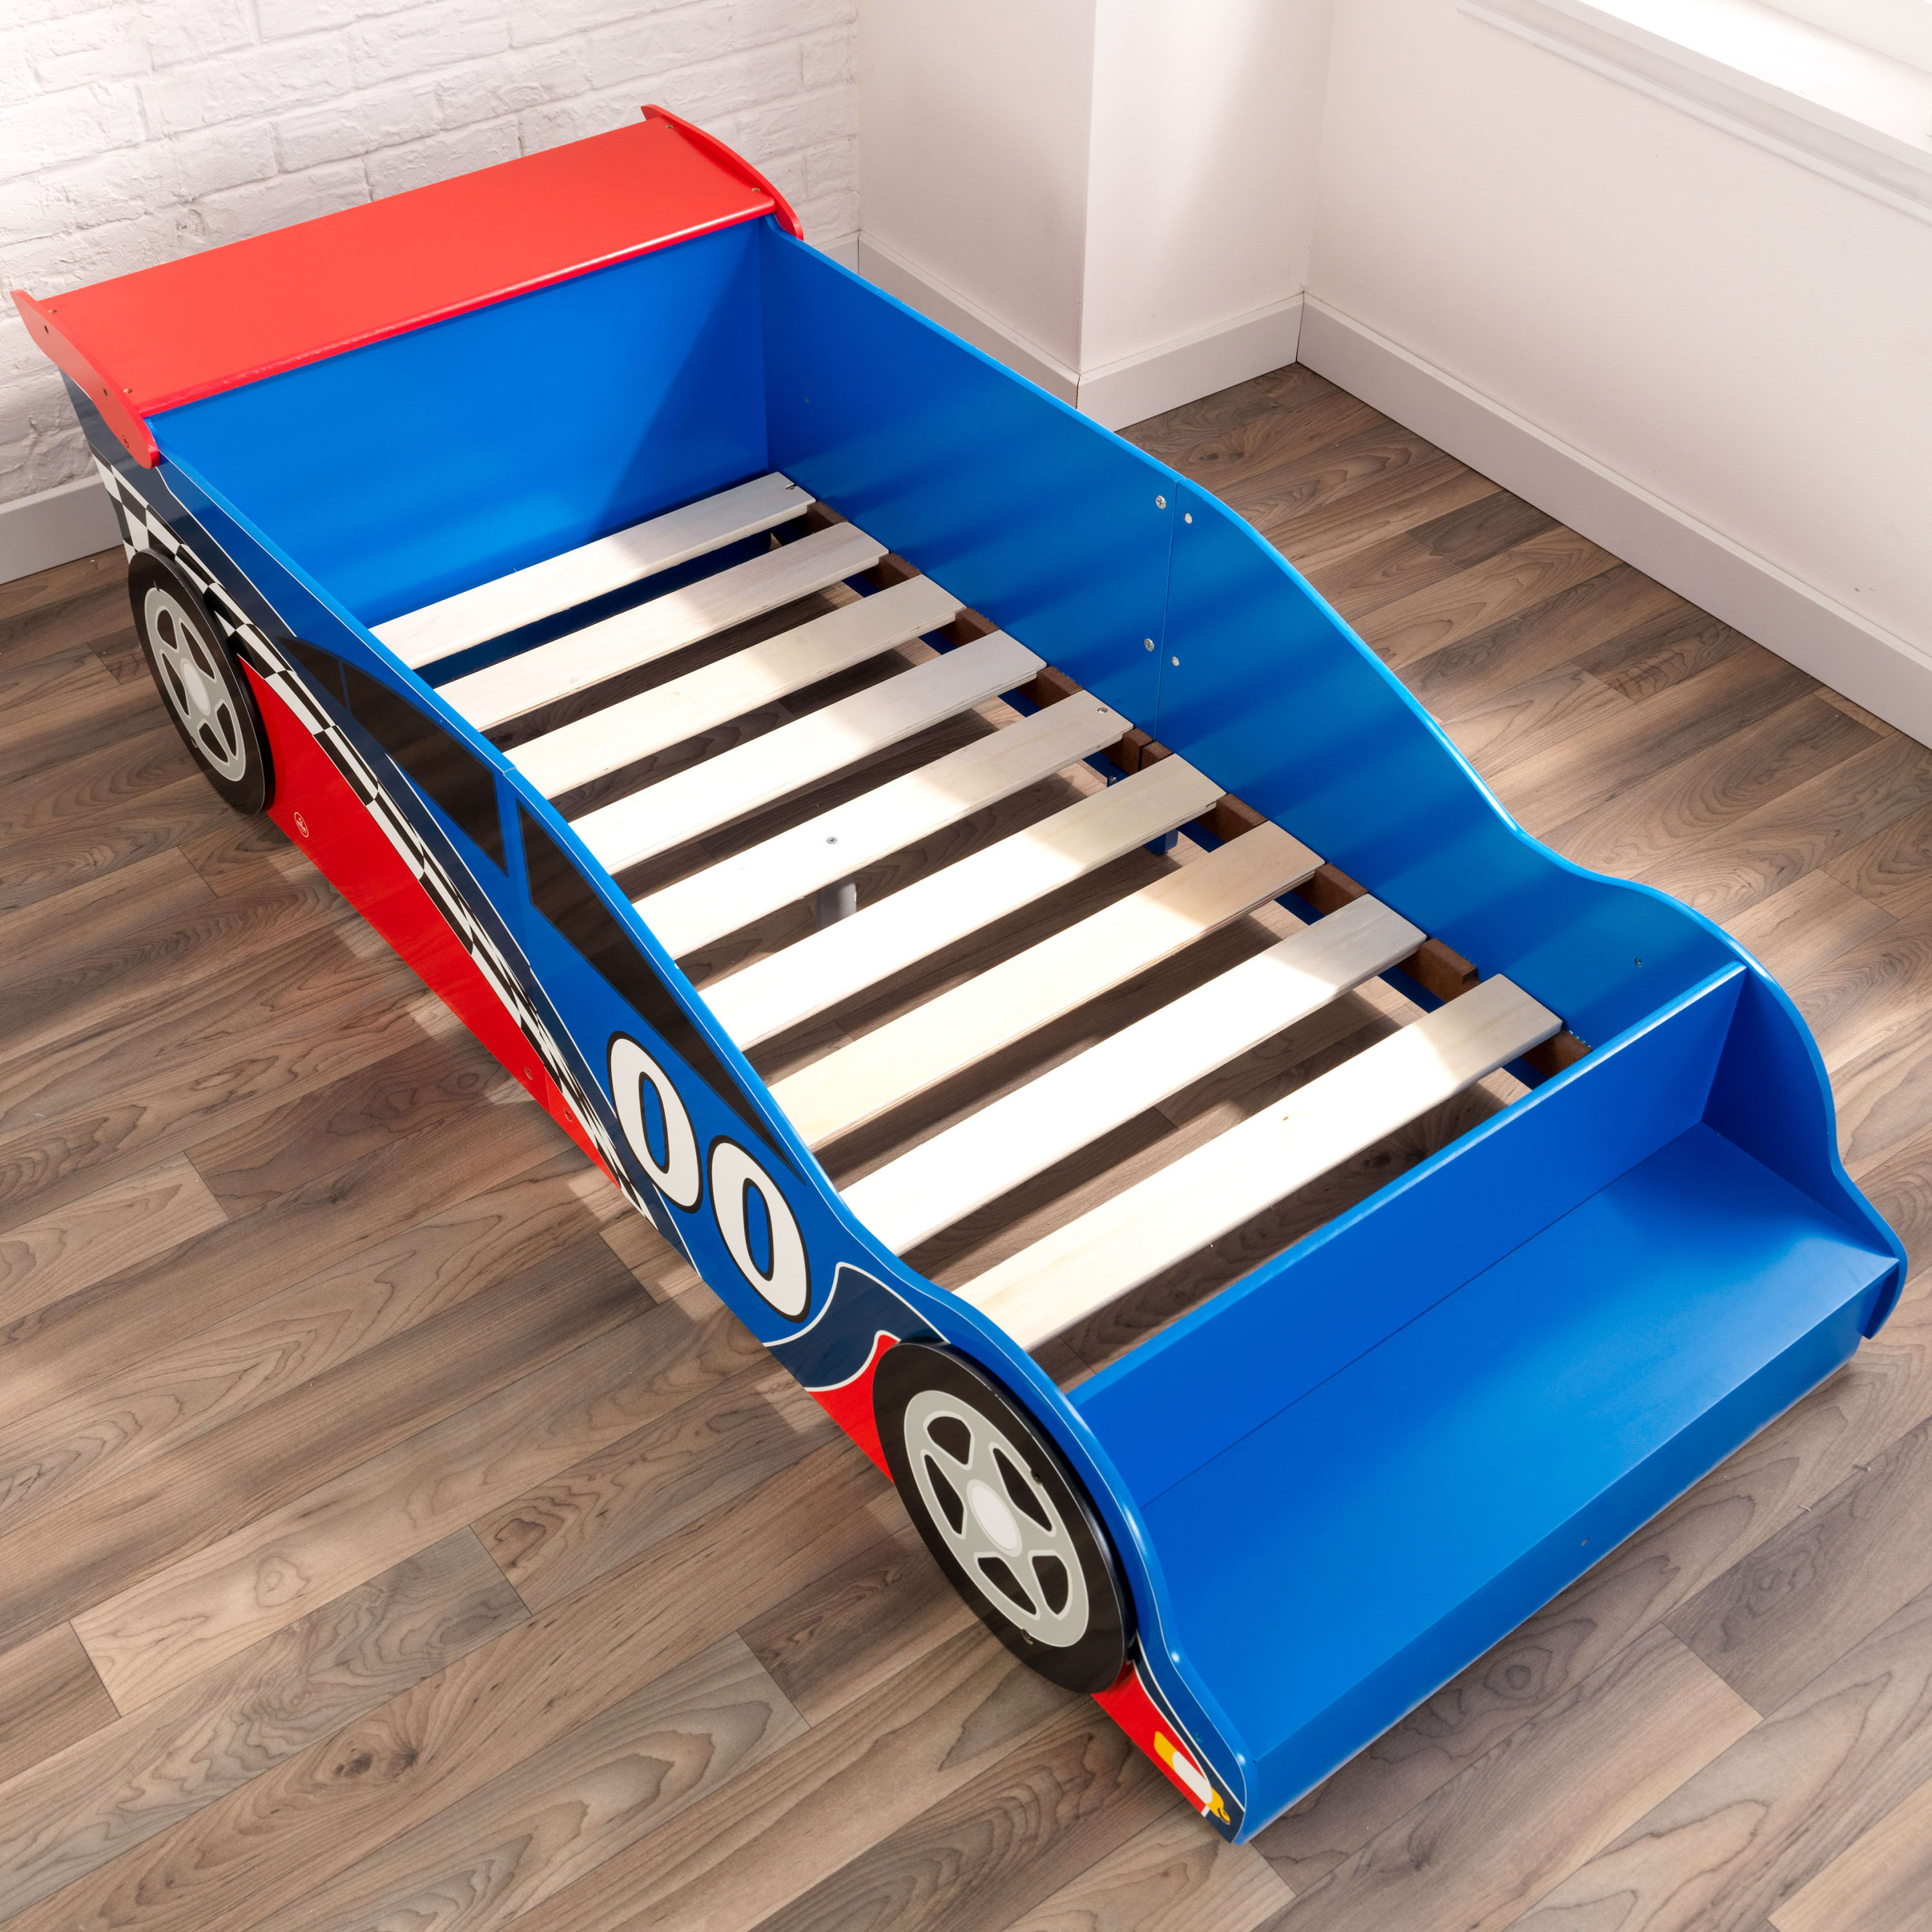 KidKraft Wooden Racecar Toddler Bed with Built-In Bench and Bed Rails - Red and Blue - image 5 of 8